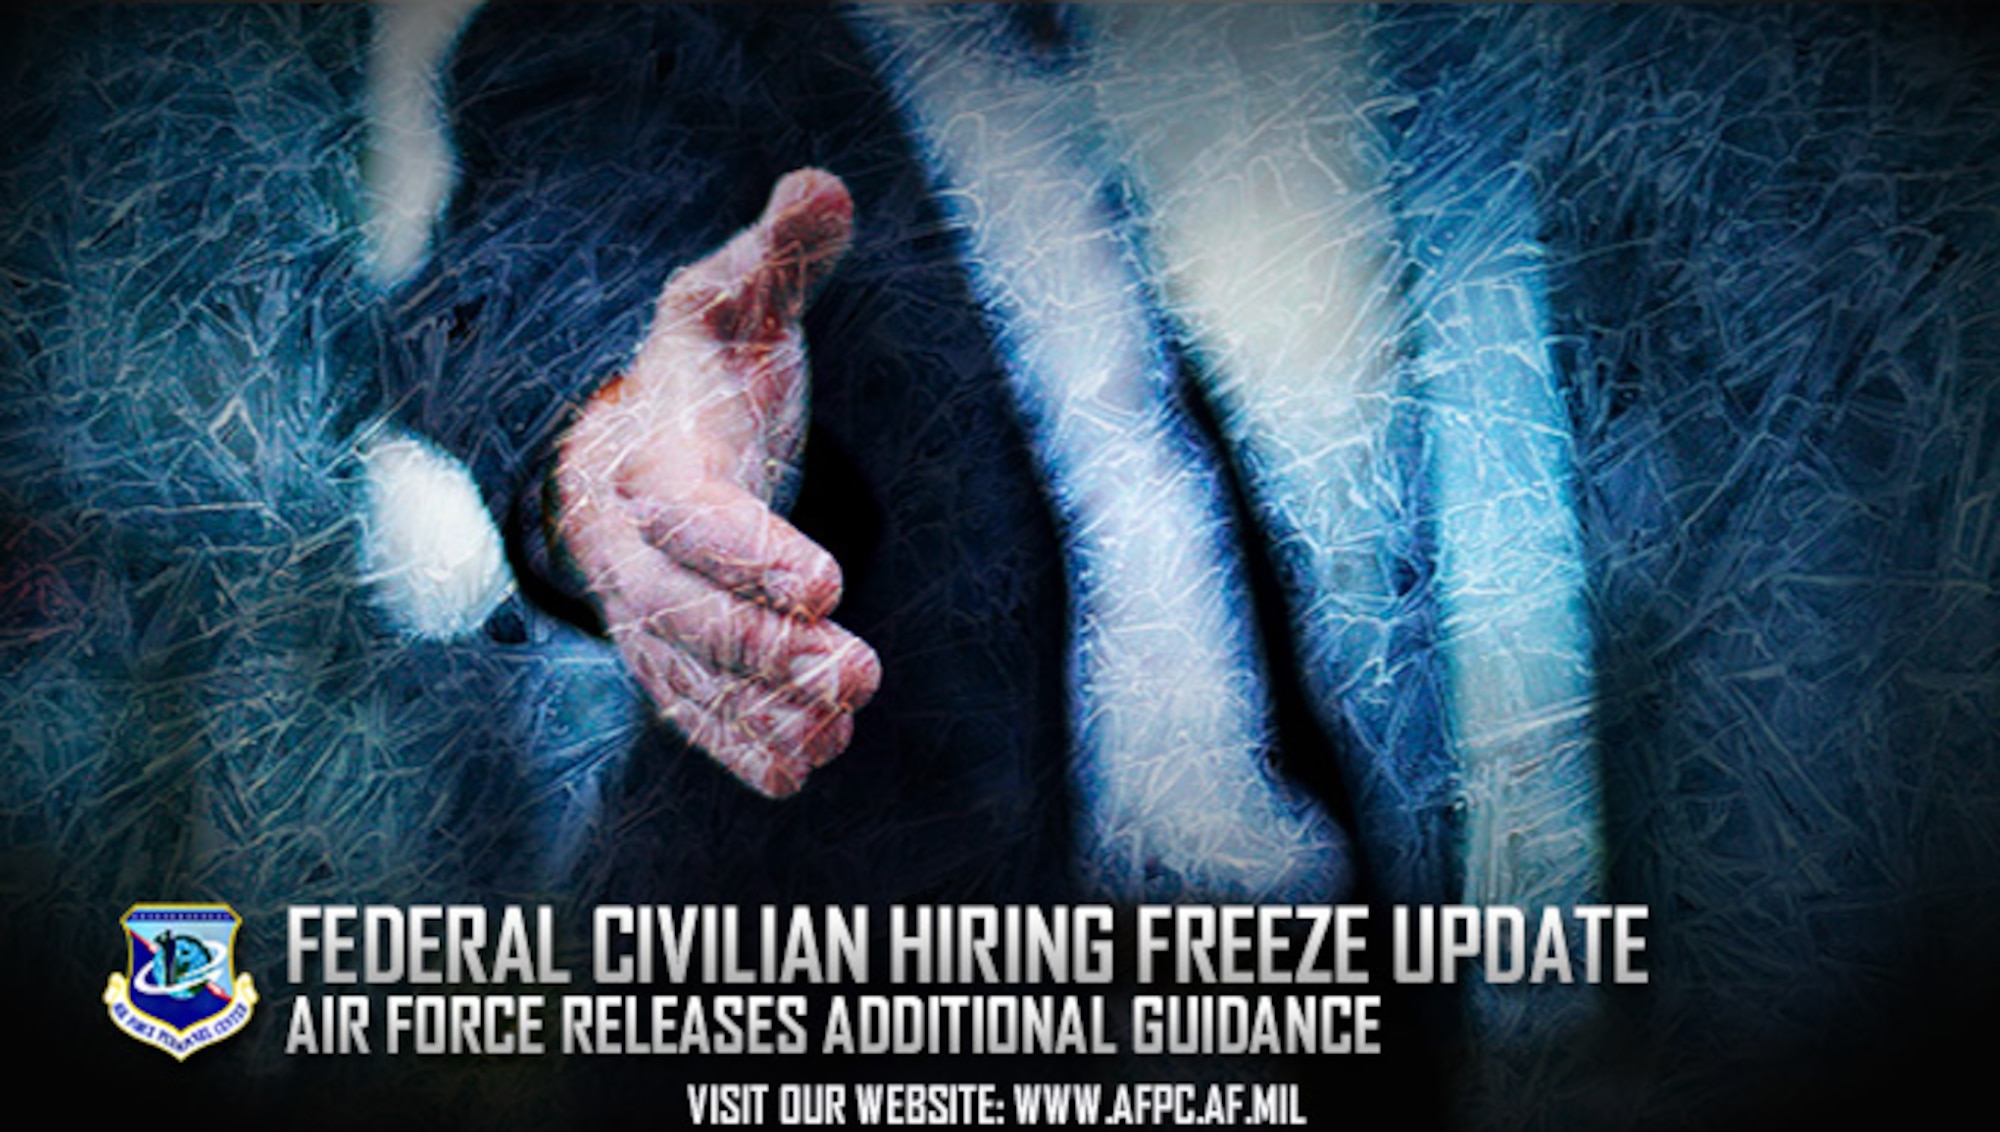 The Air Force has released additional guidance in regard to the federal civilian hiring freeze implemented Jan. 23. (U.S. Air Force graphic by Staff Sgt. Alexx Pons)